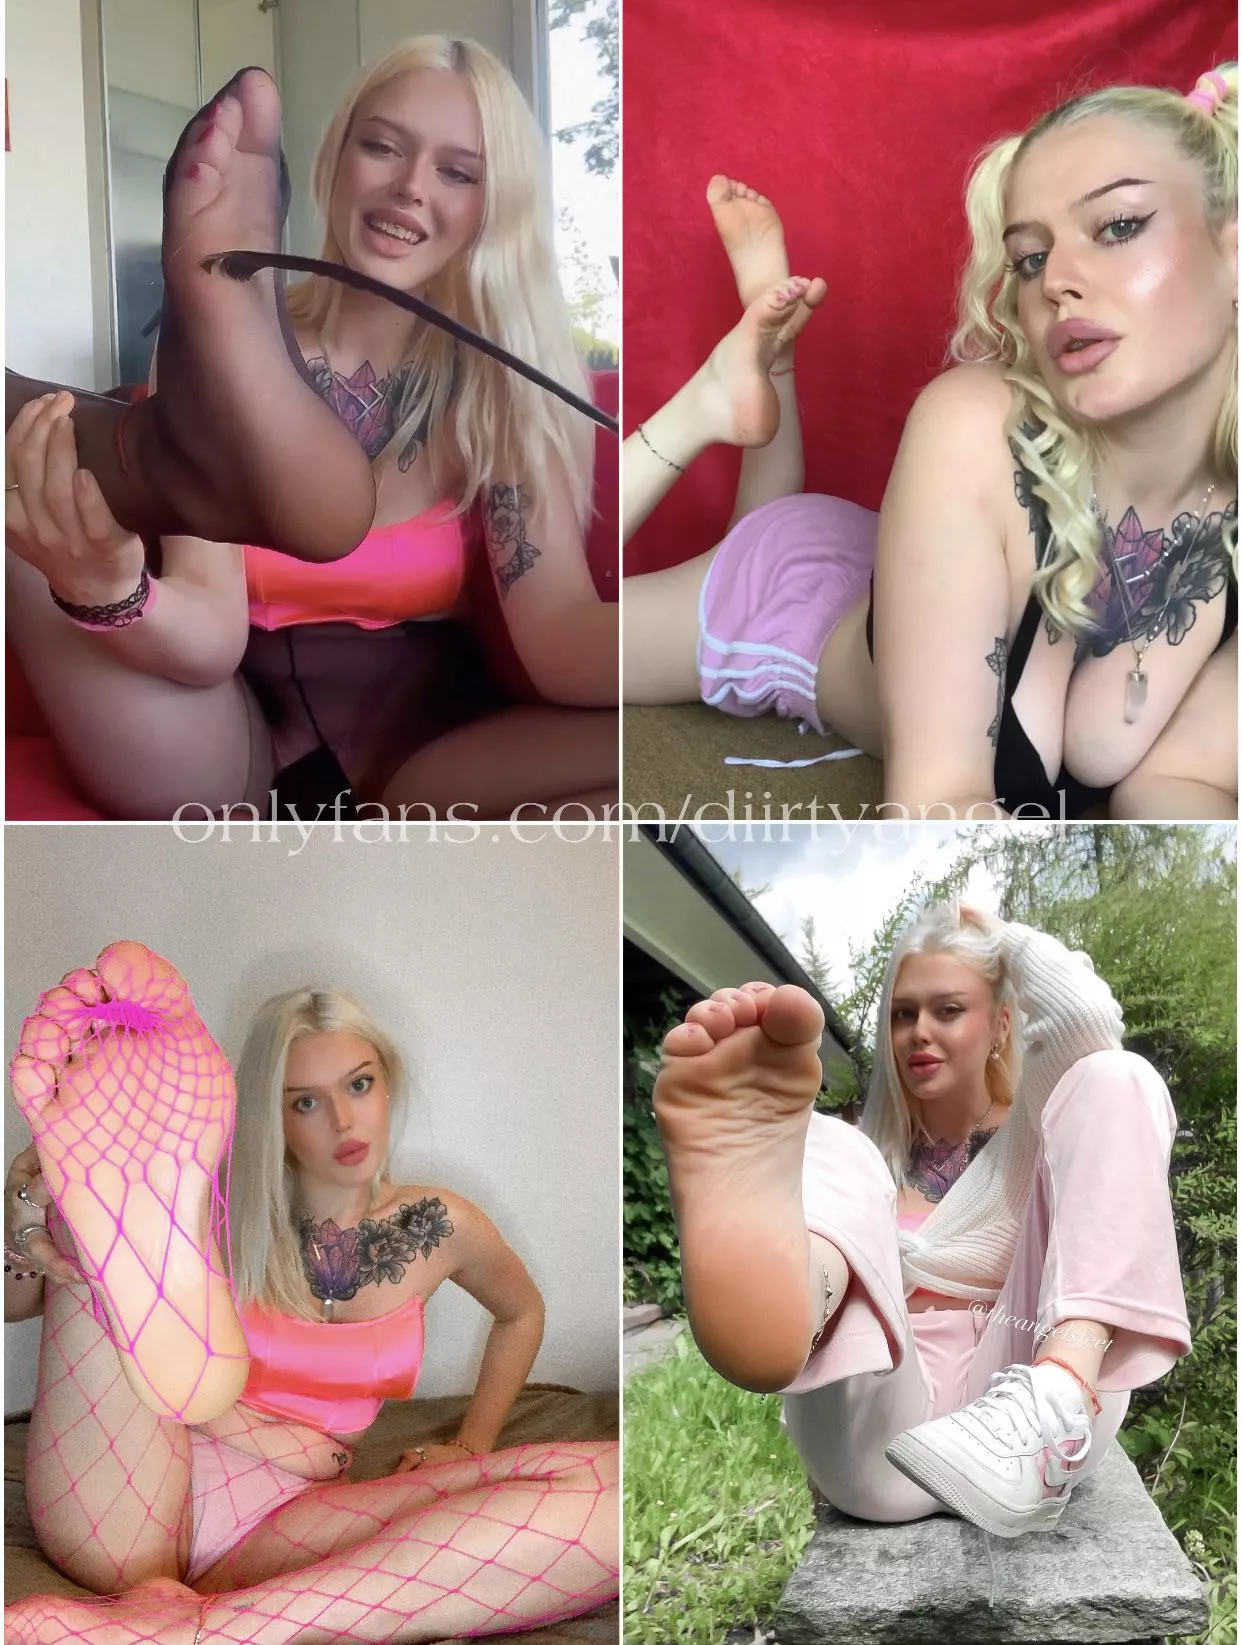 Your blonde footmodel dream 💖👣 FREE Onlyfans TOP 9%✨ Come and say hi, link in comments😘 posted by Mobile-Reserve-6288